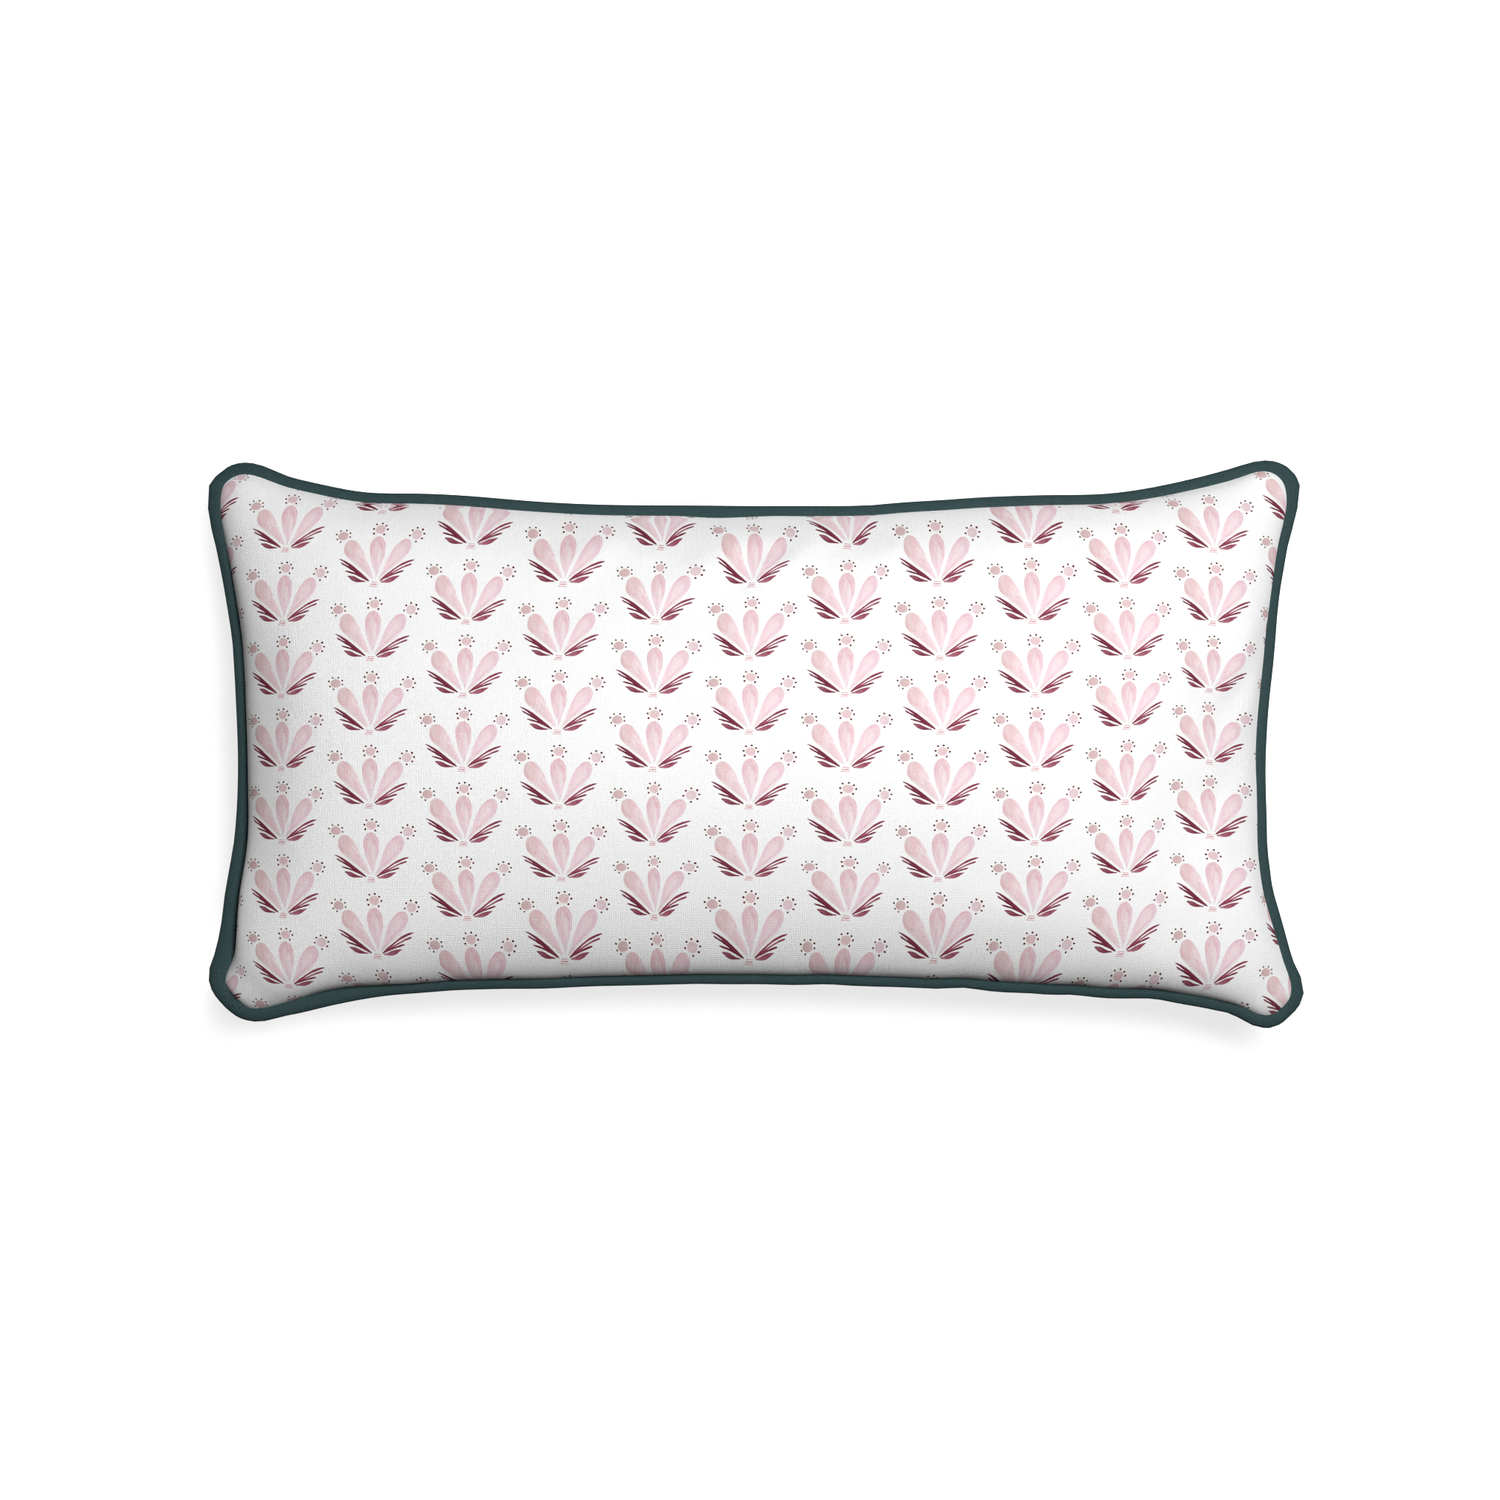 Midi-lumbar serena pink custom pink & burgundy drop repeat floralpillow with p piping on white background